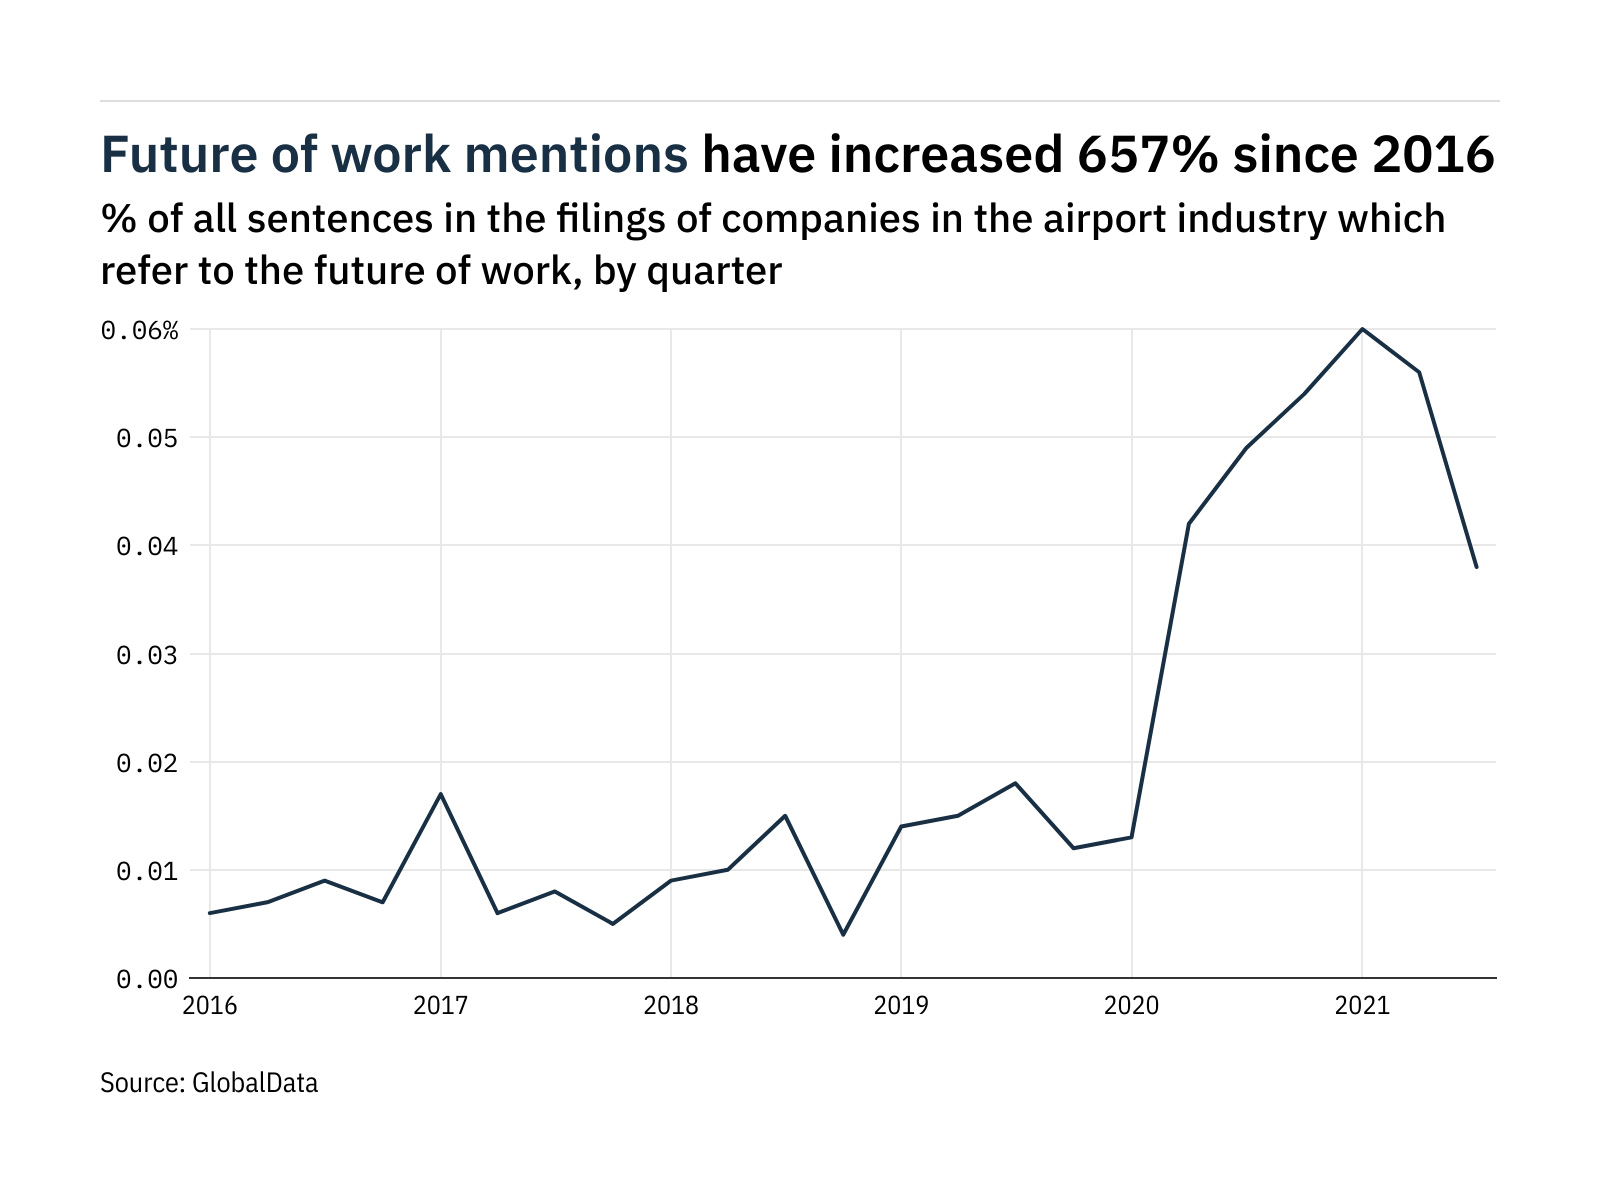 Filings buzz in the airport industry: 32% decrease in the future of work mentions in Q3 of 2021